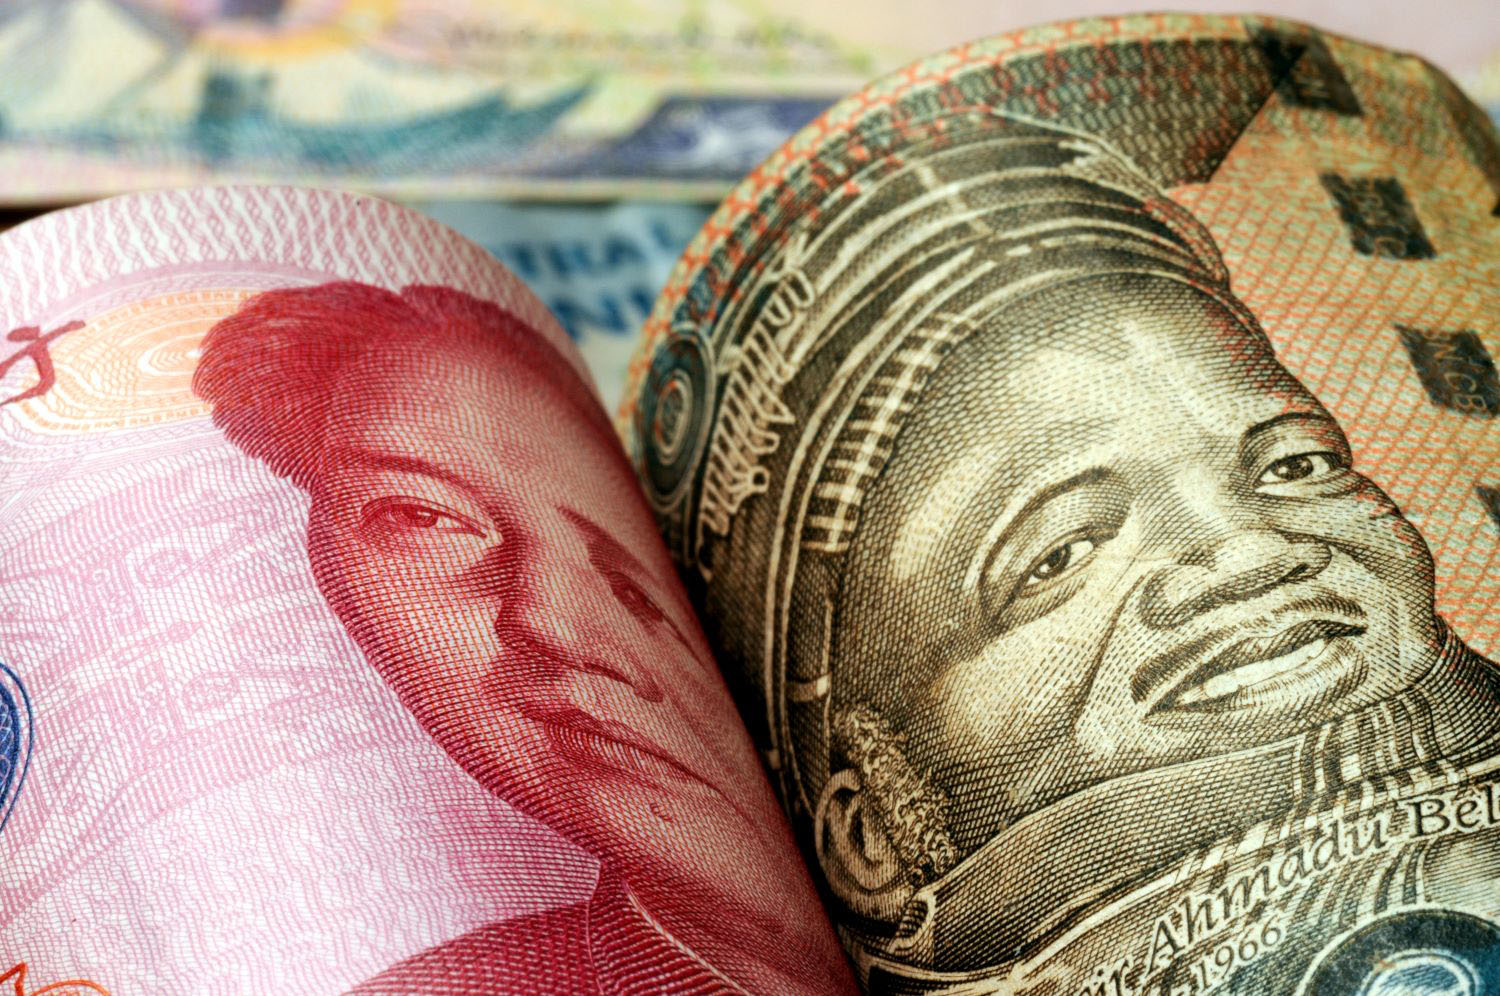 Chinese and African Currency side by side